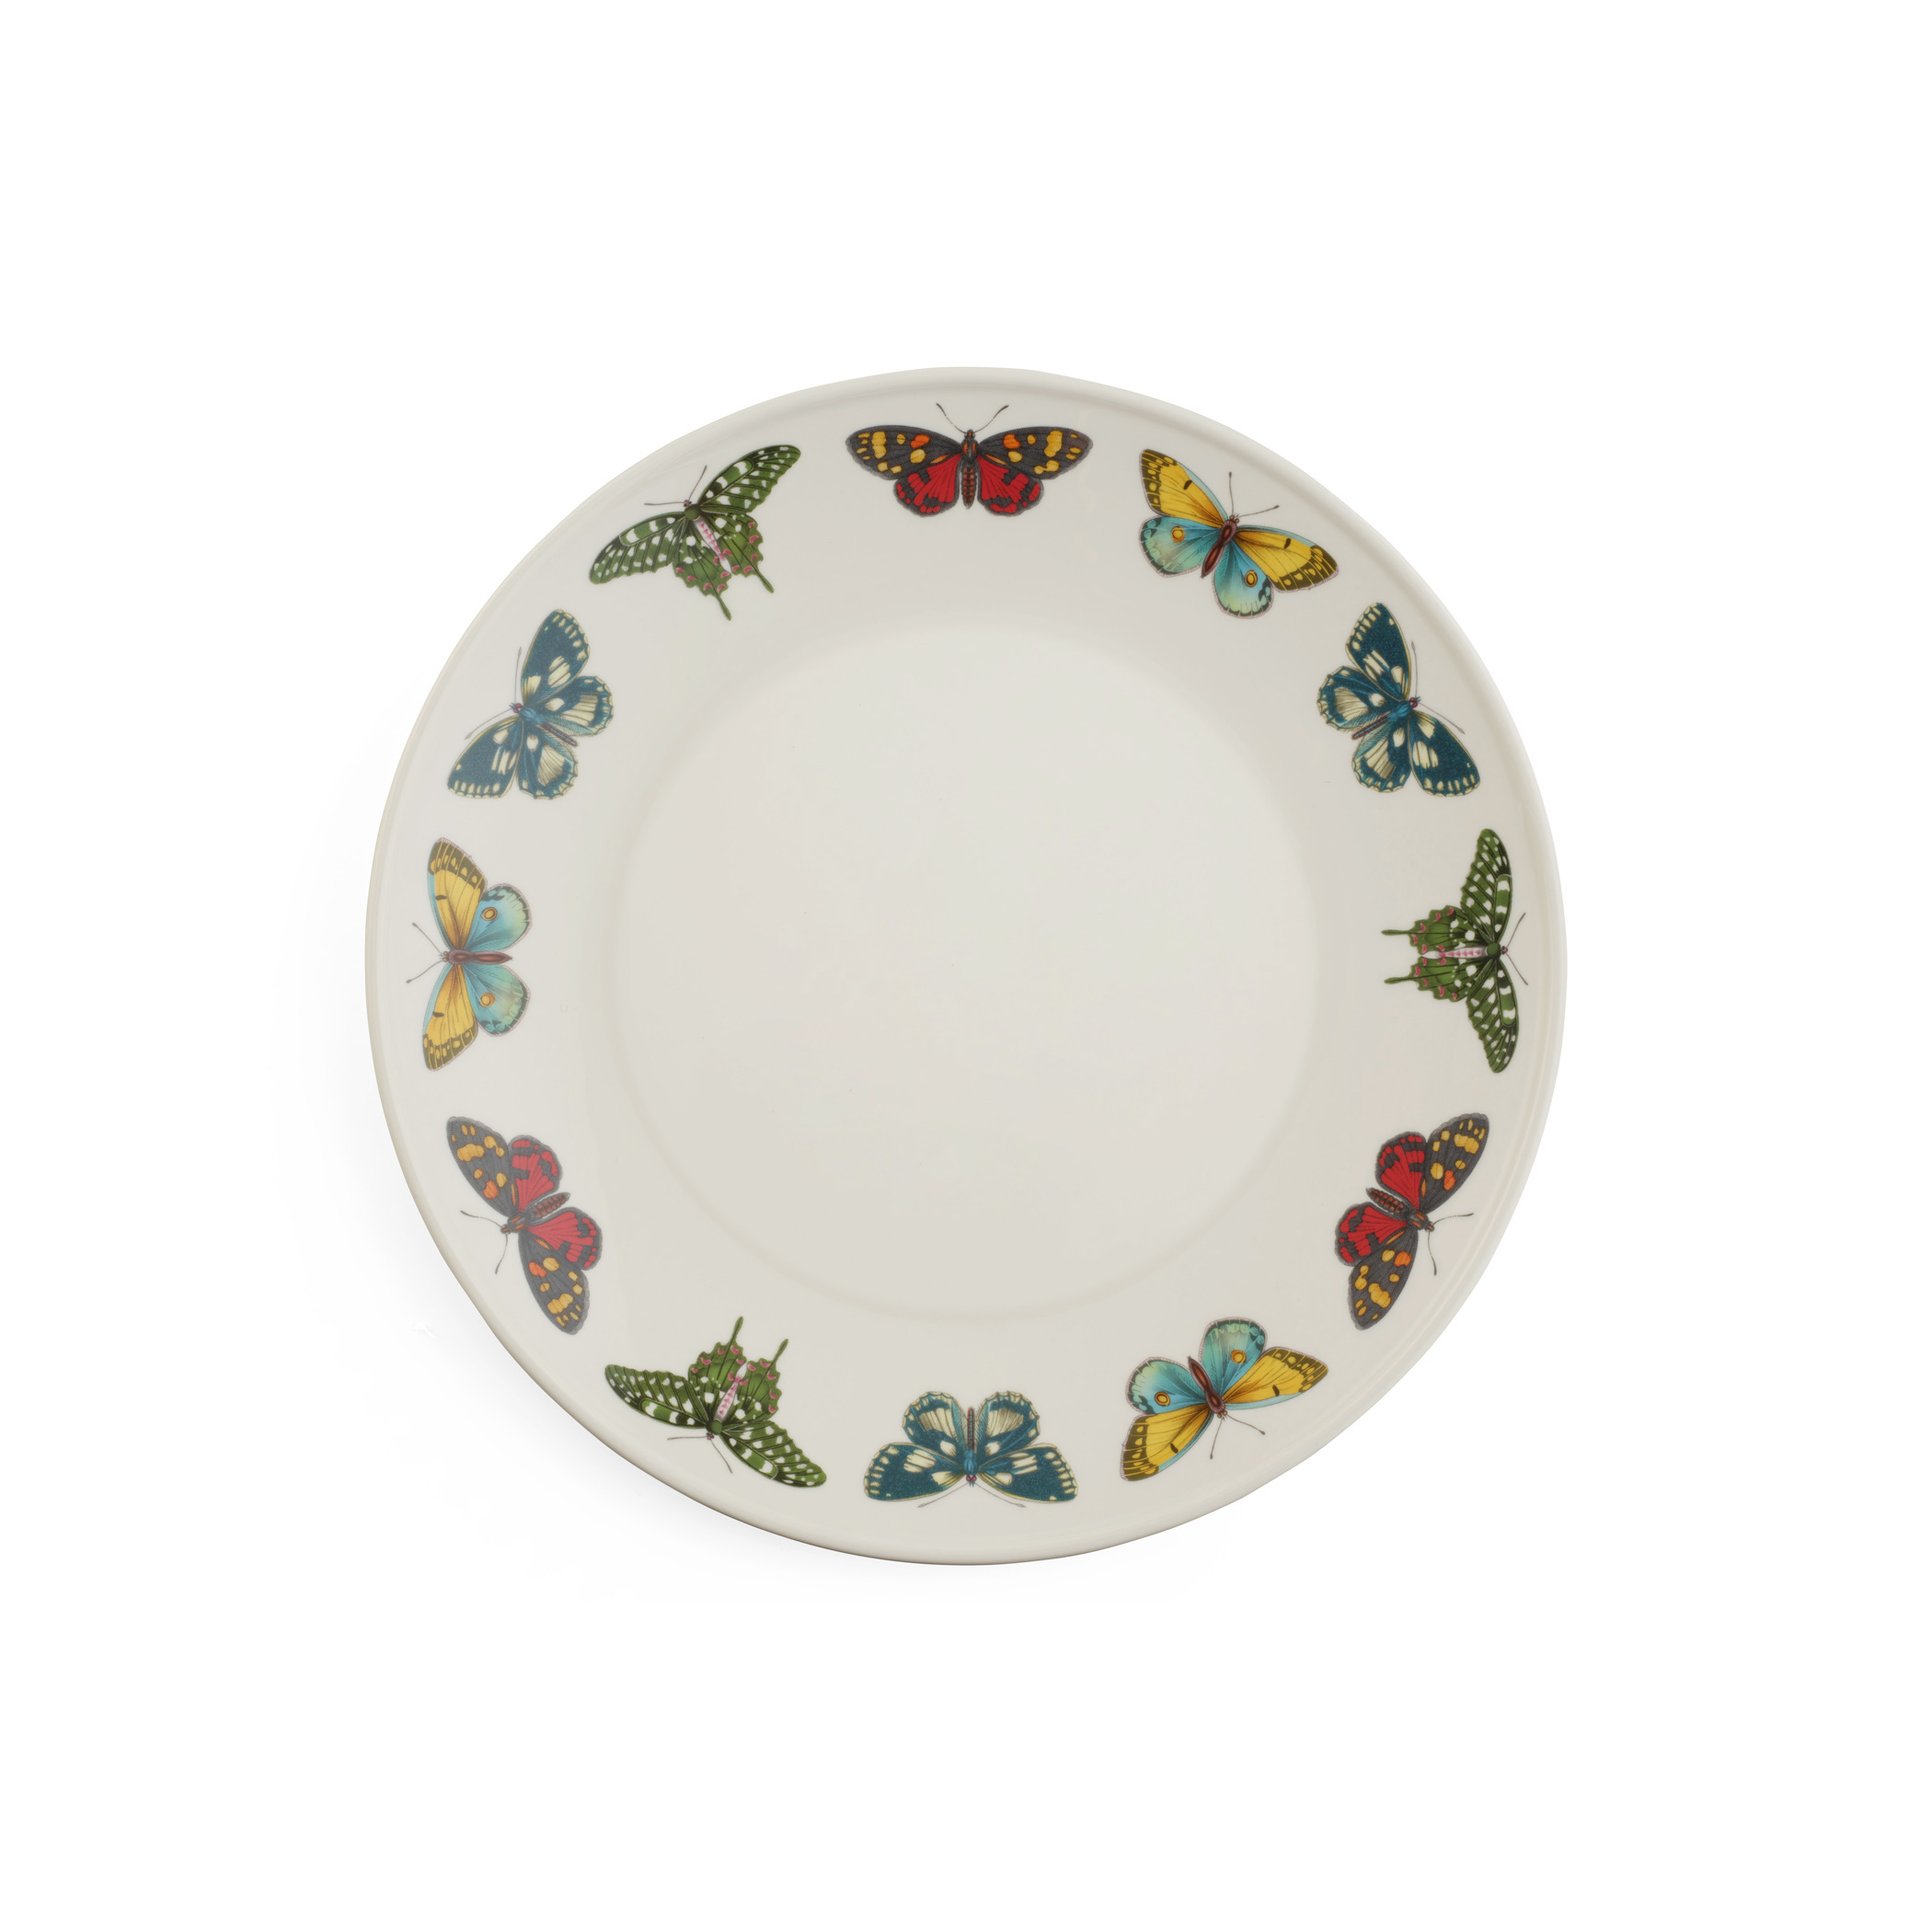 Botanic Garden Harmony Accents White 12 Inch Coupe Plate image number null